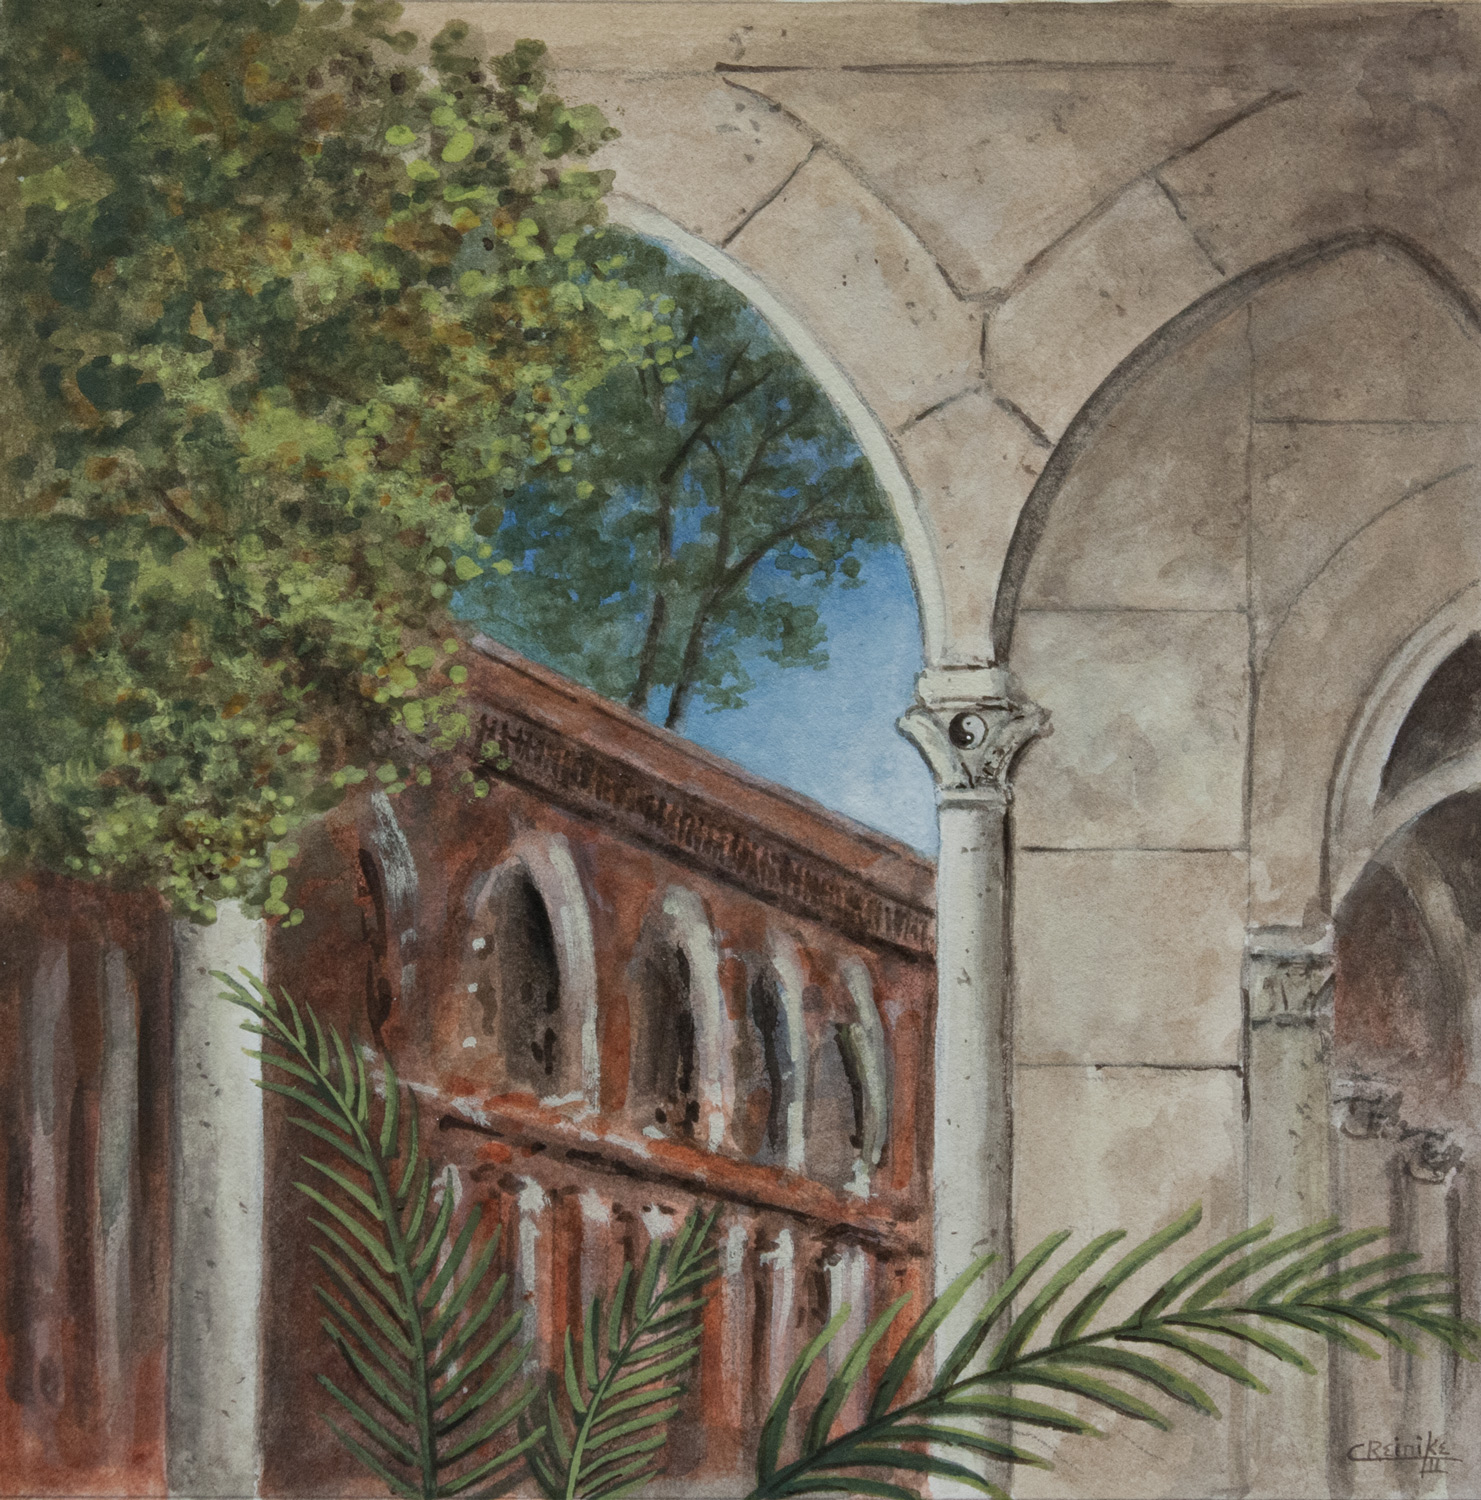 A Vision Watercolor Study by Charles H. Reinike III